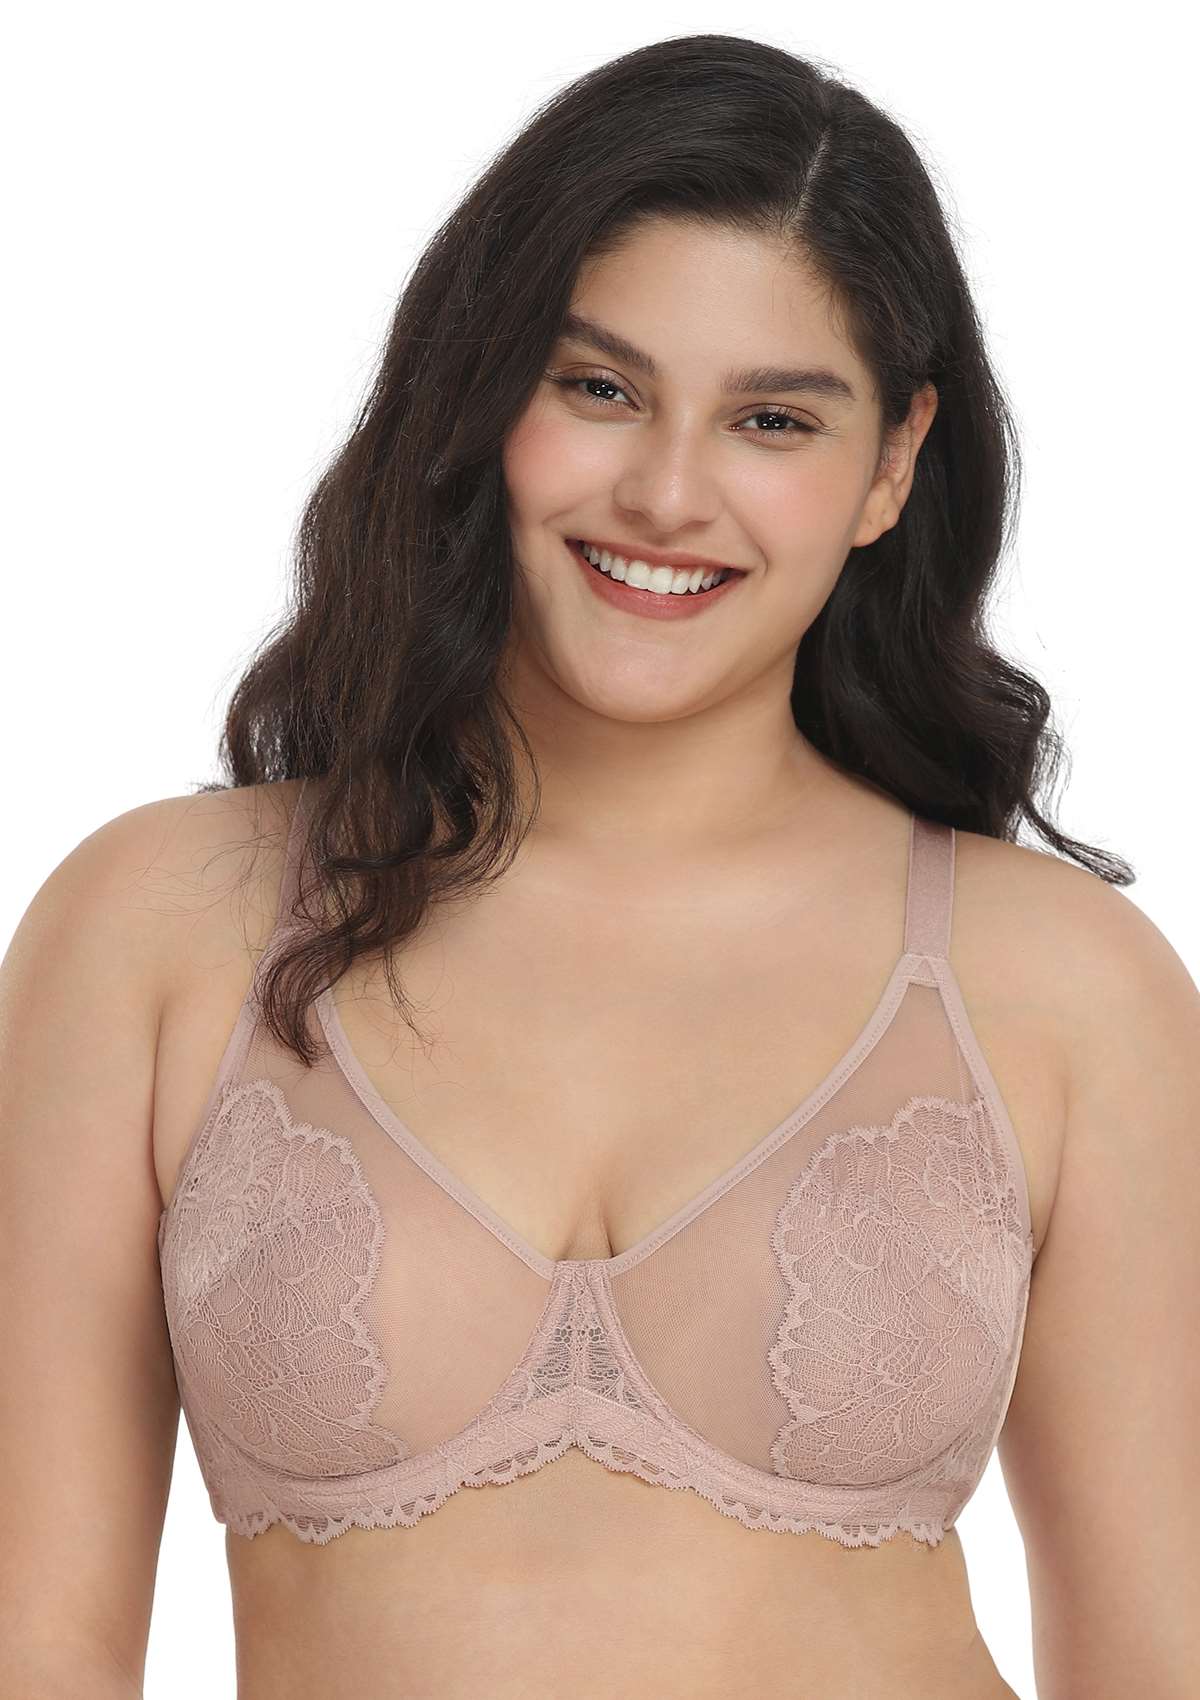 HSIA Blossom Lace Bra And Panties Set: Best Bra For Large Busts - Dark Pink / 36 / DDD/F